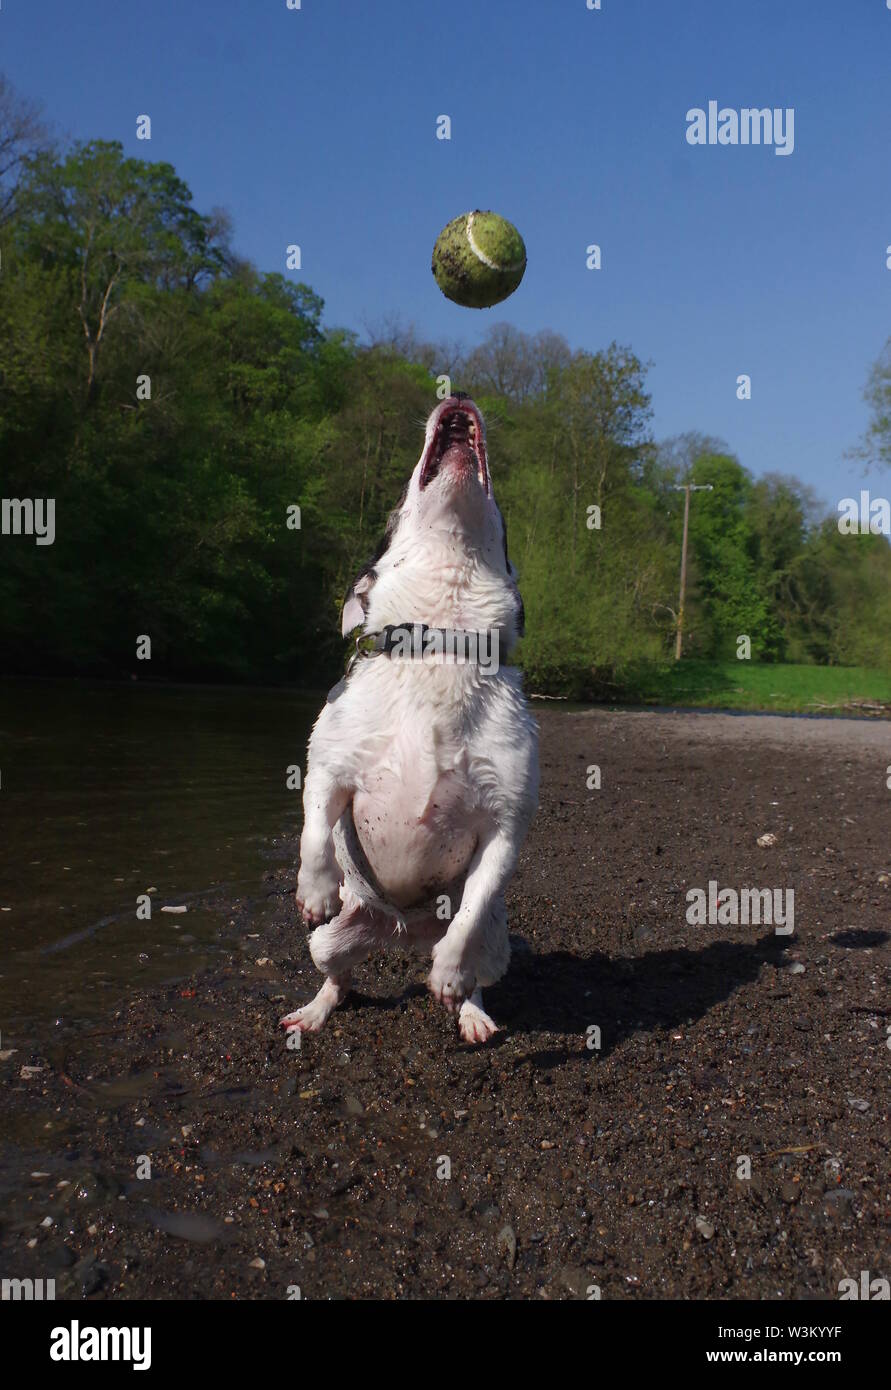 Jack Russell catching ball Stock Photo